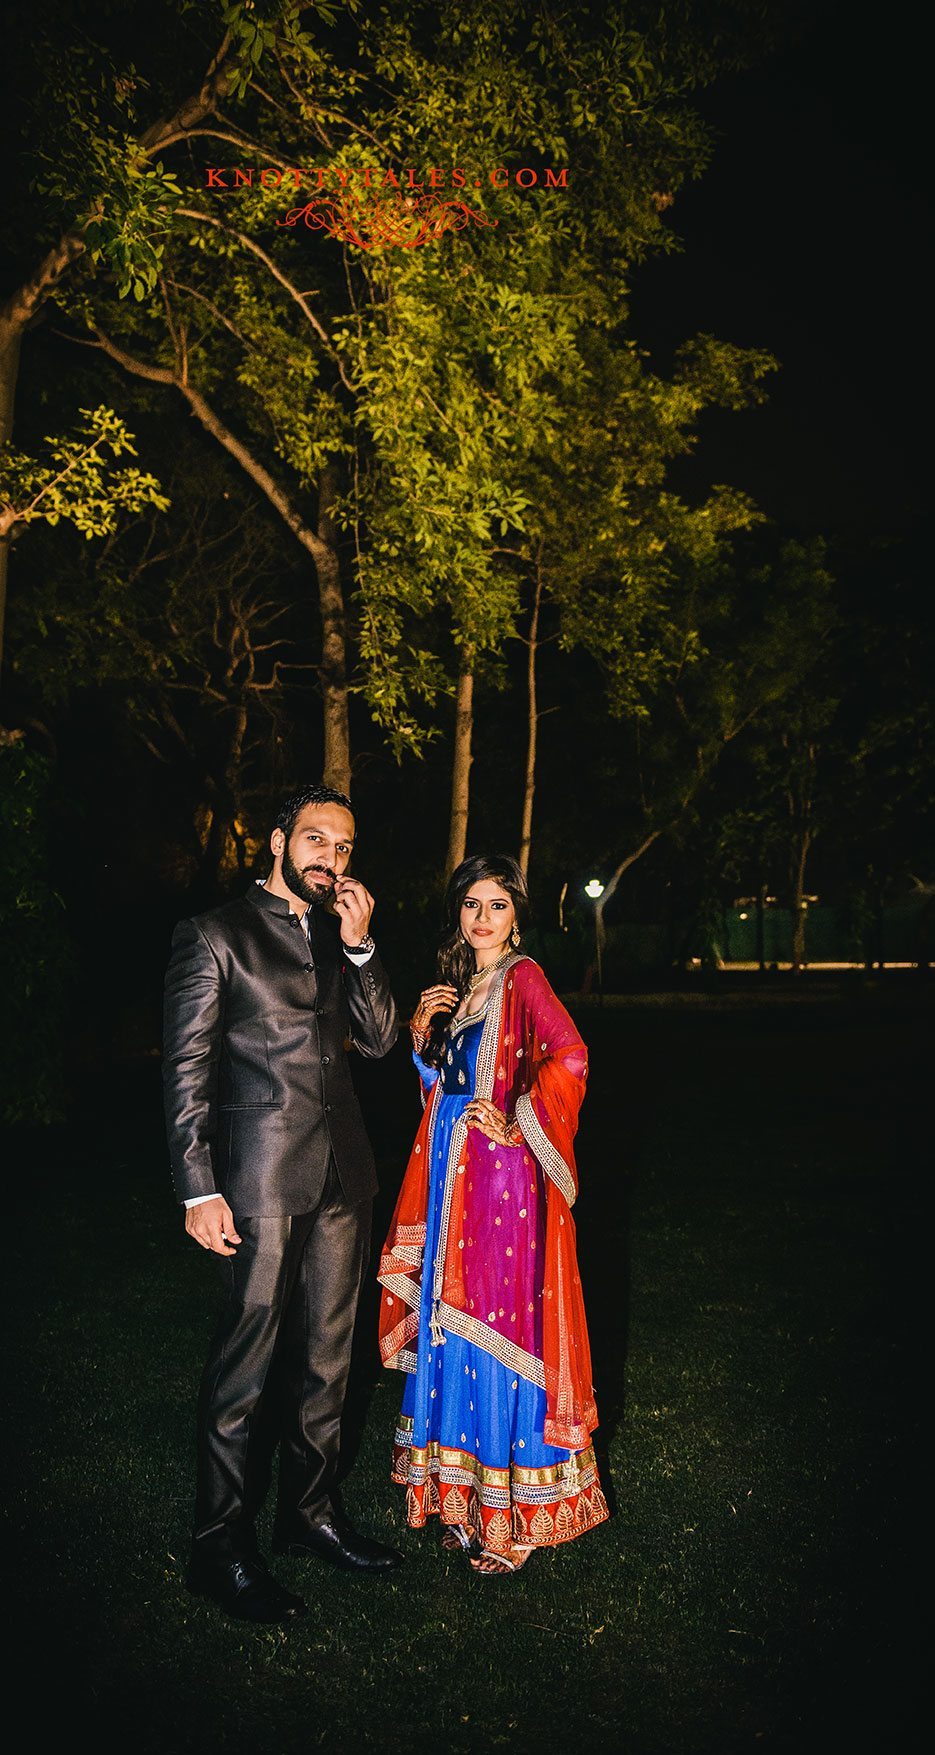 Indian wedding photographer : photography by Naina and Knottytales | Gursimran and Sheleja: Sangeet and Cocktails, Delhi